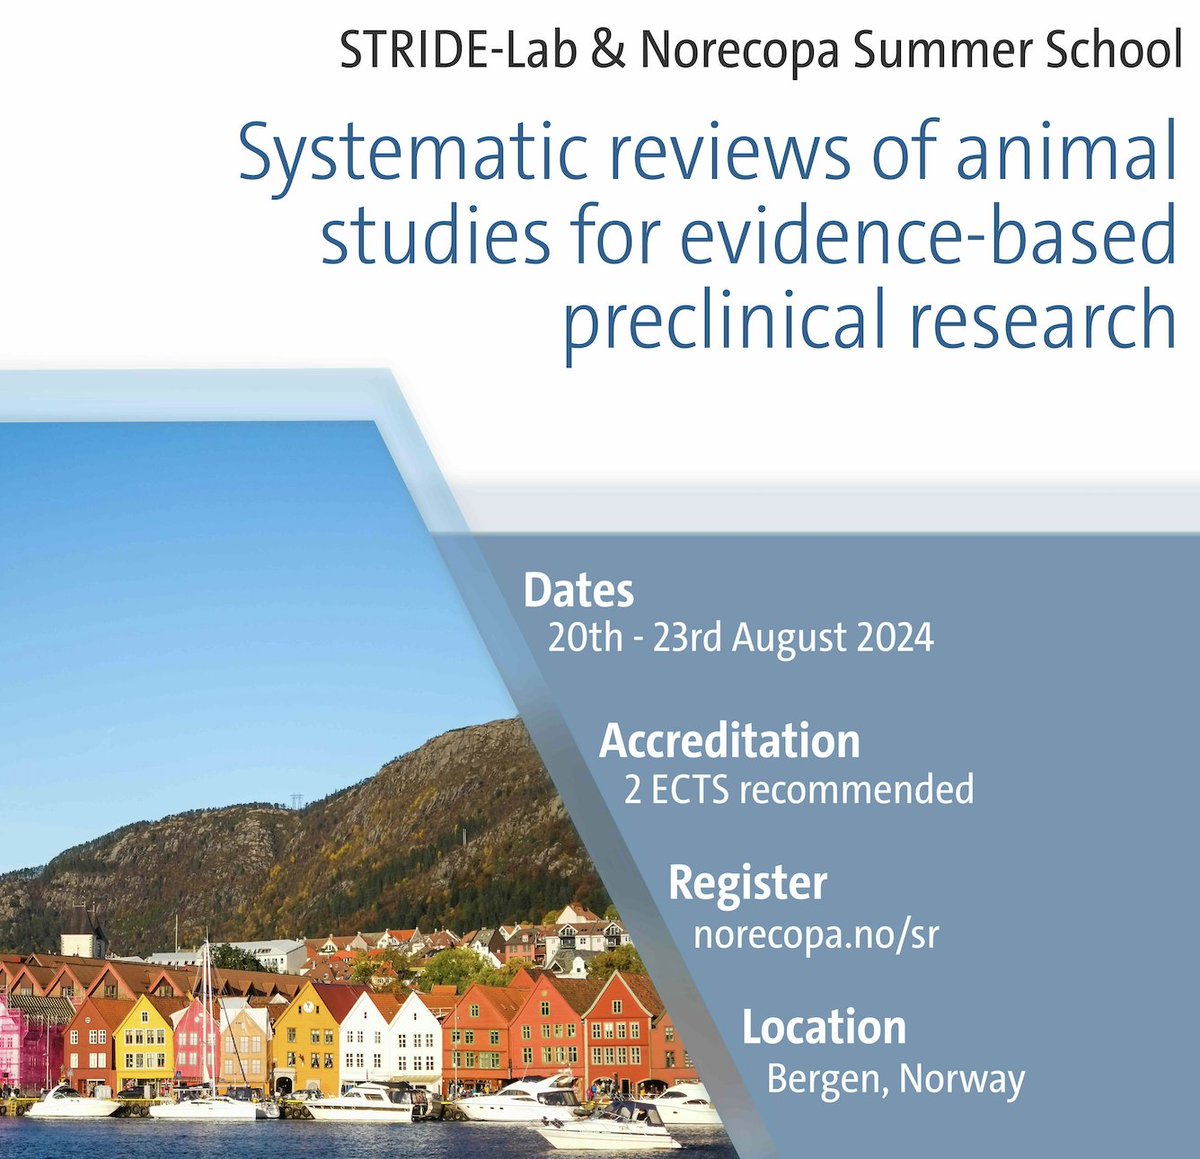 Calling early career researchers who would like to learn more about evidence-based research, literature searching and systematic reviews! Join us in beautiful Bergen, Norway for a 4-day Summer School in August. More information at norecopa.no/SR Please spread the word!